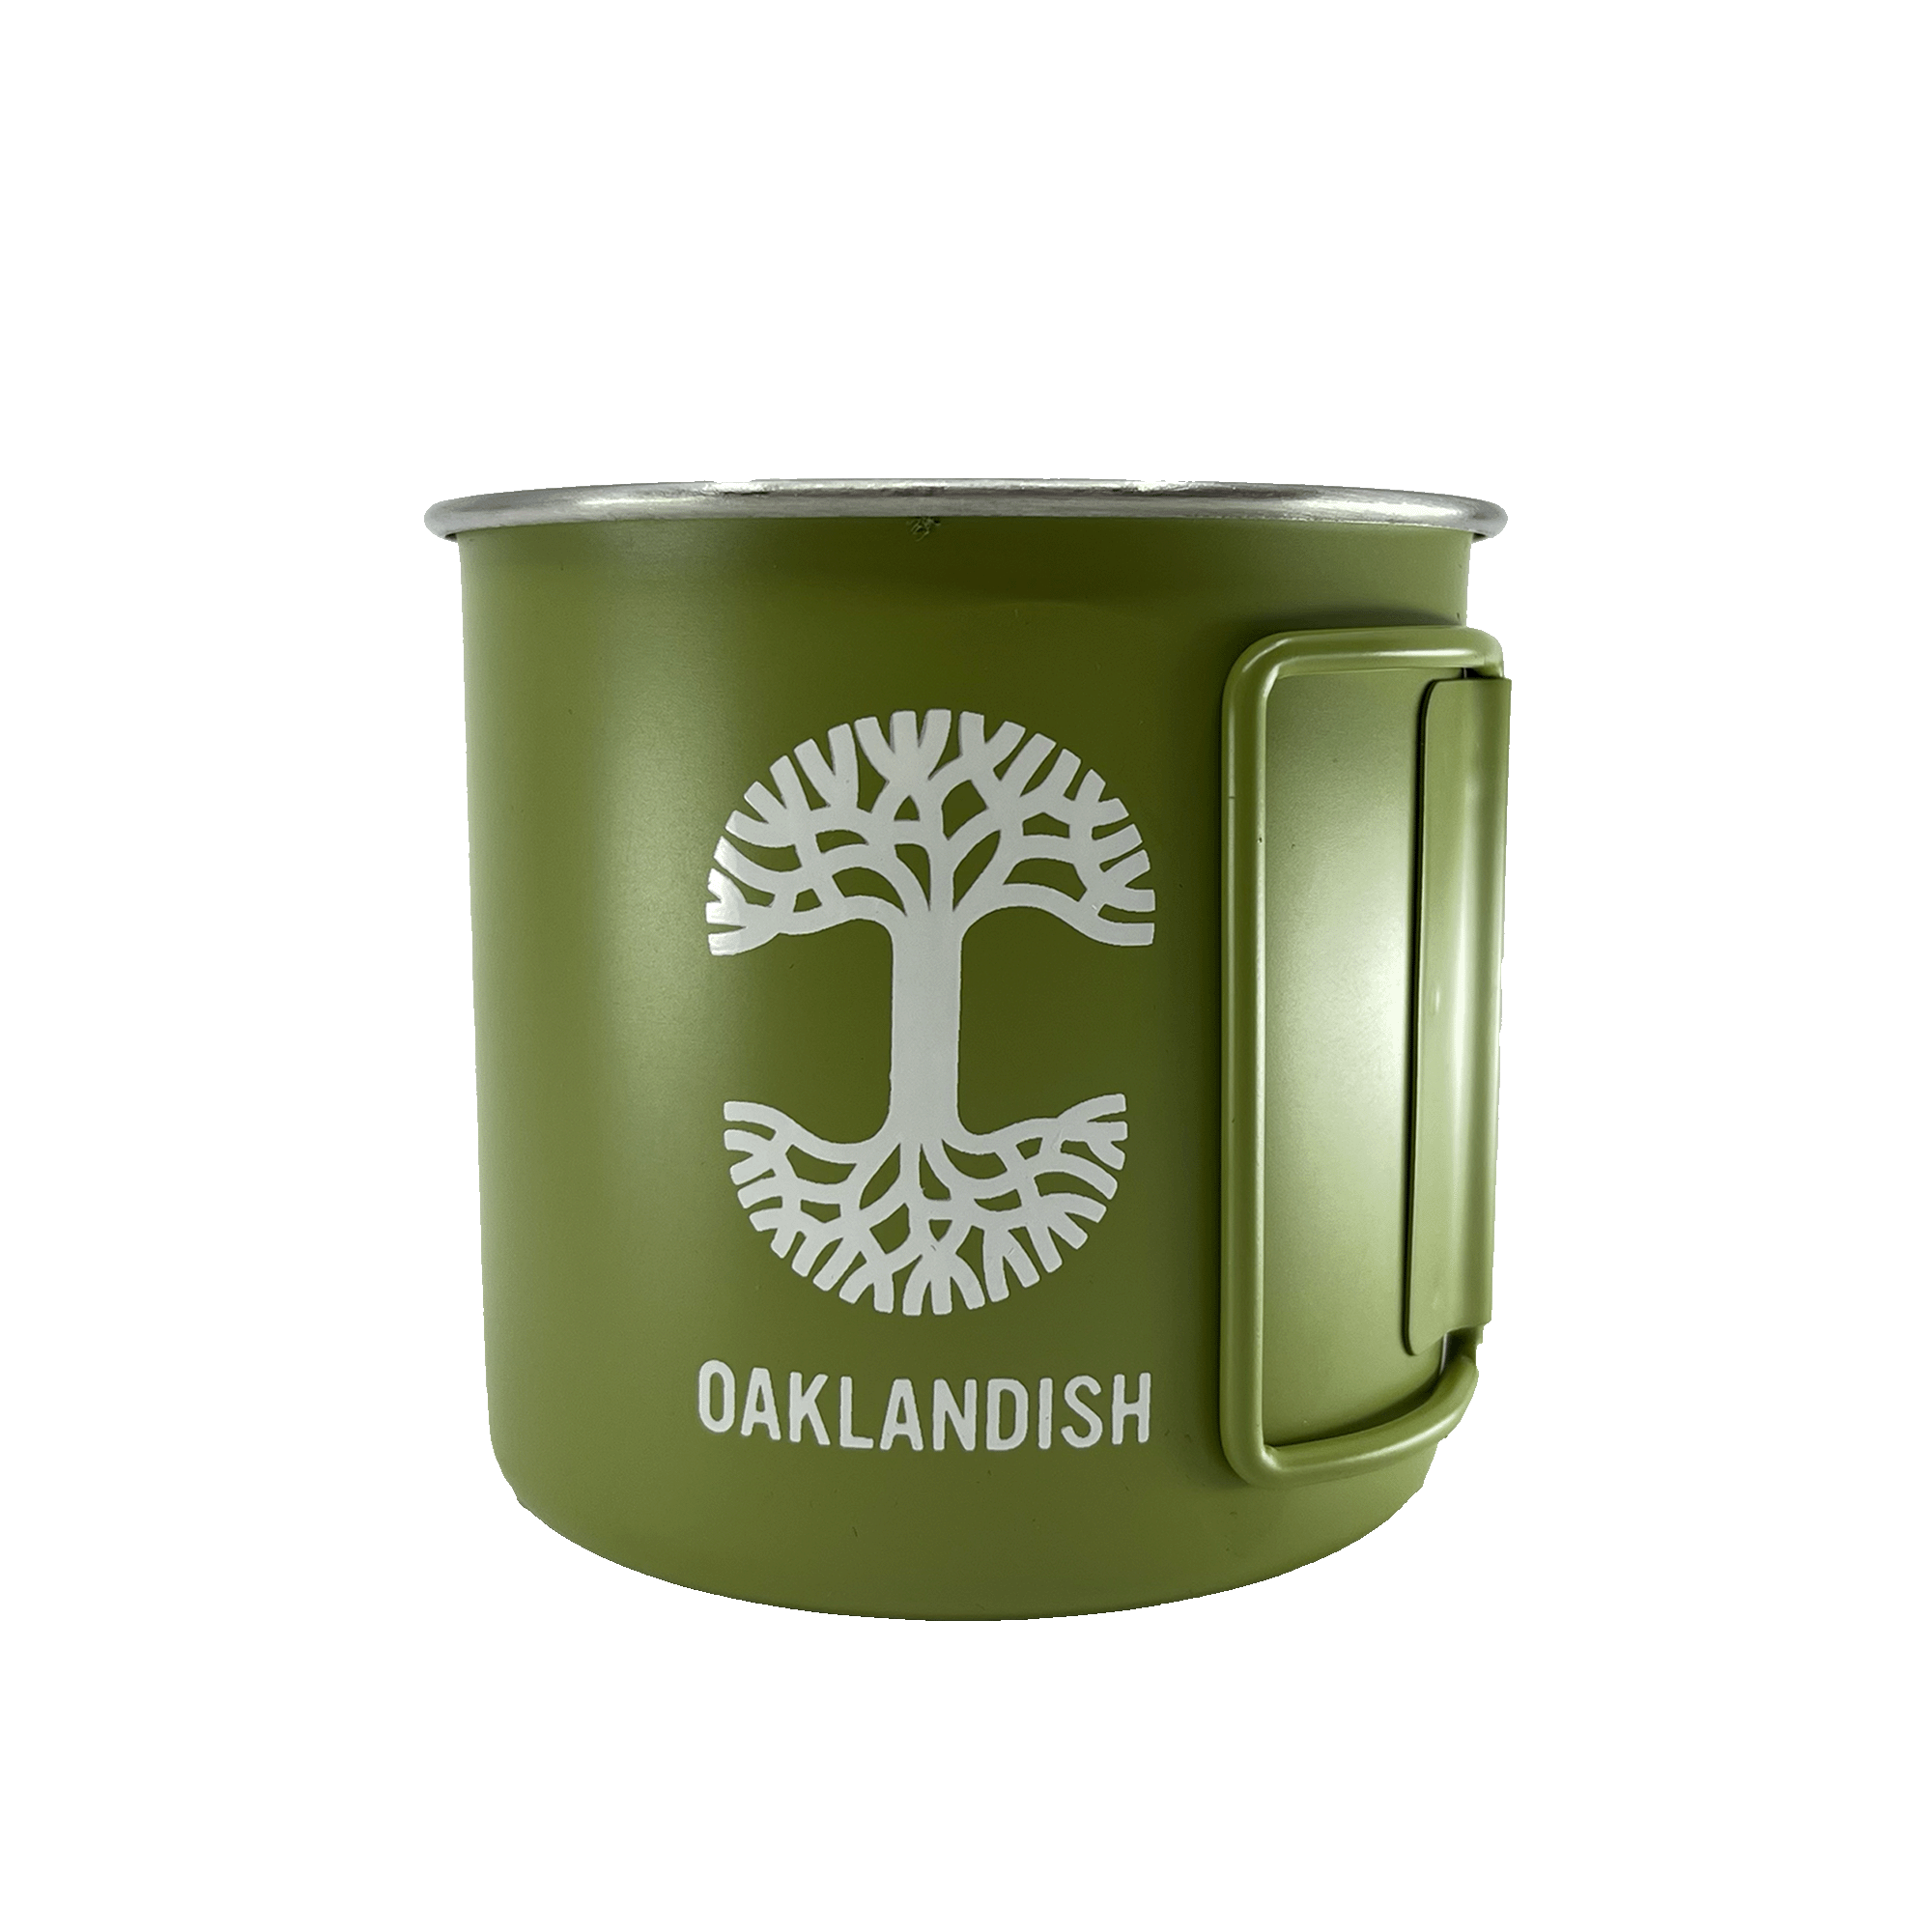 Green stainless steel camp mug with collapsable handles, large white Oaklandish tree logo, and wordmark. 